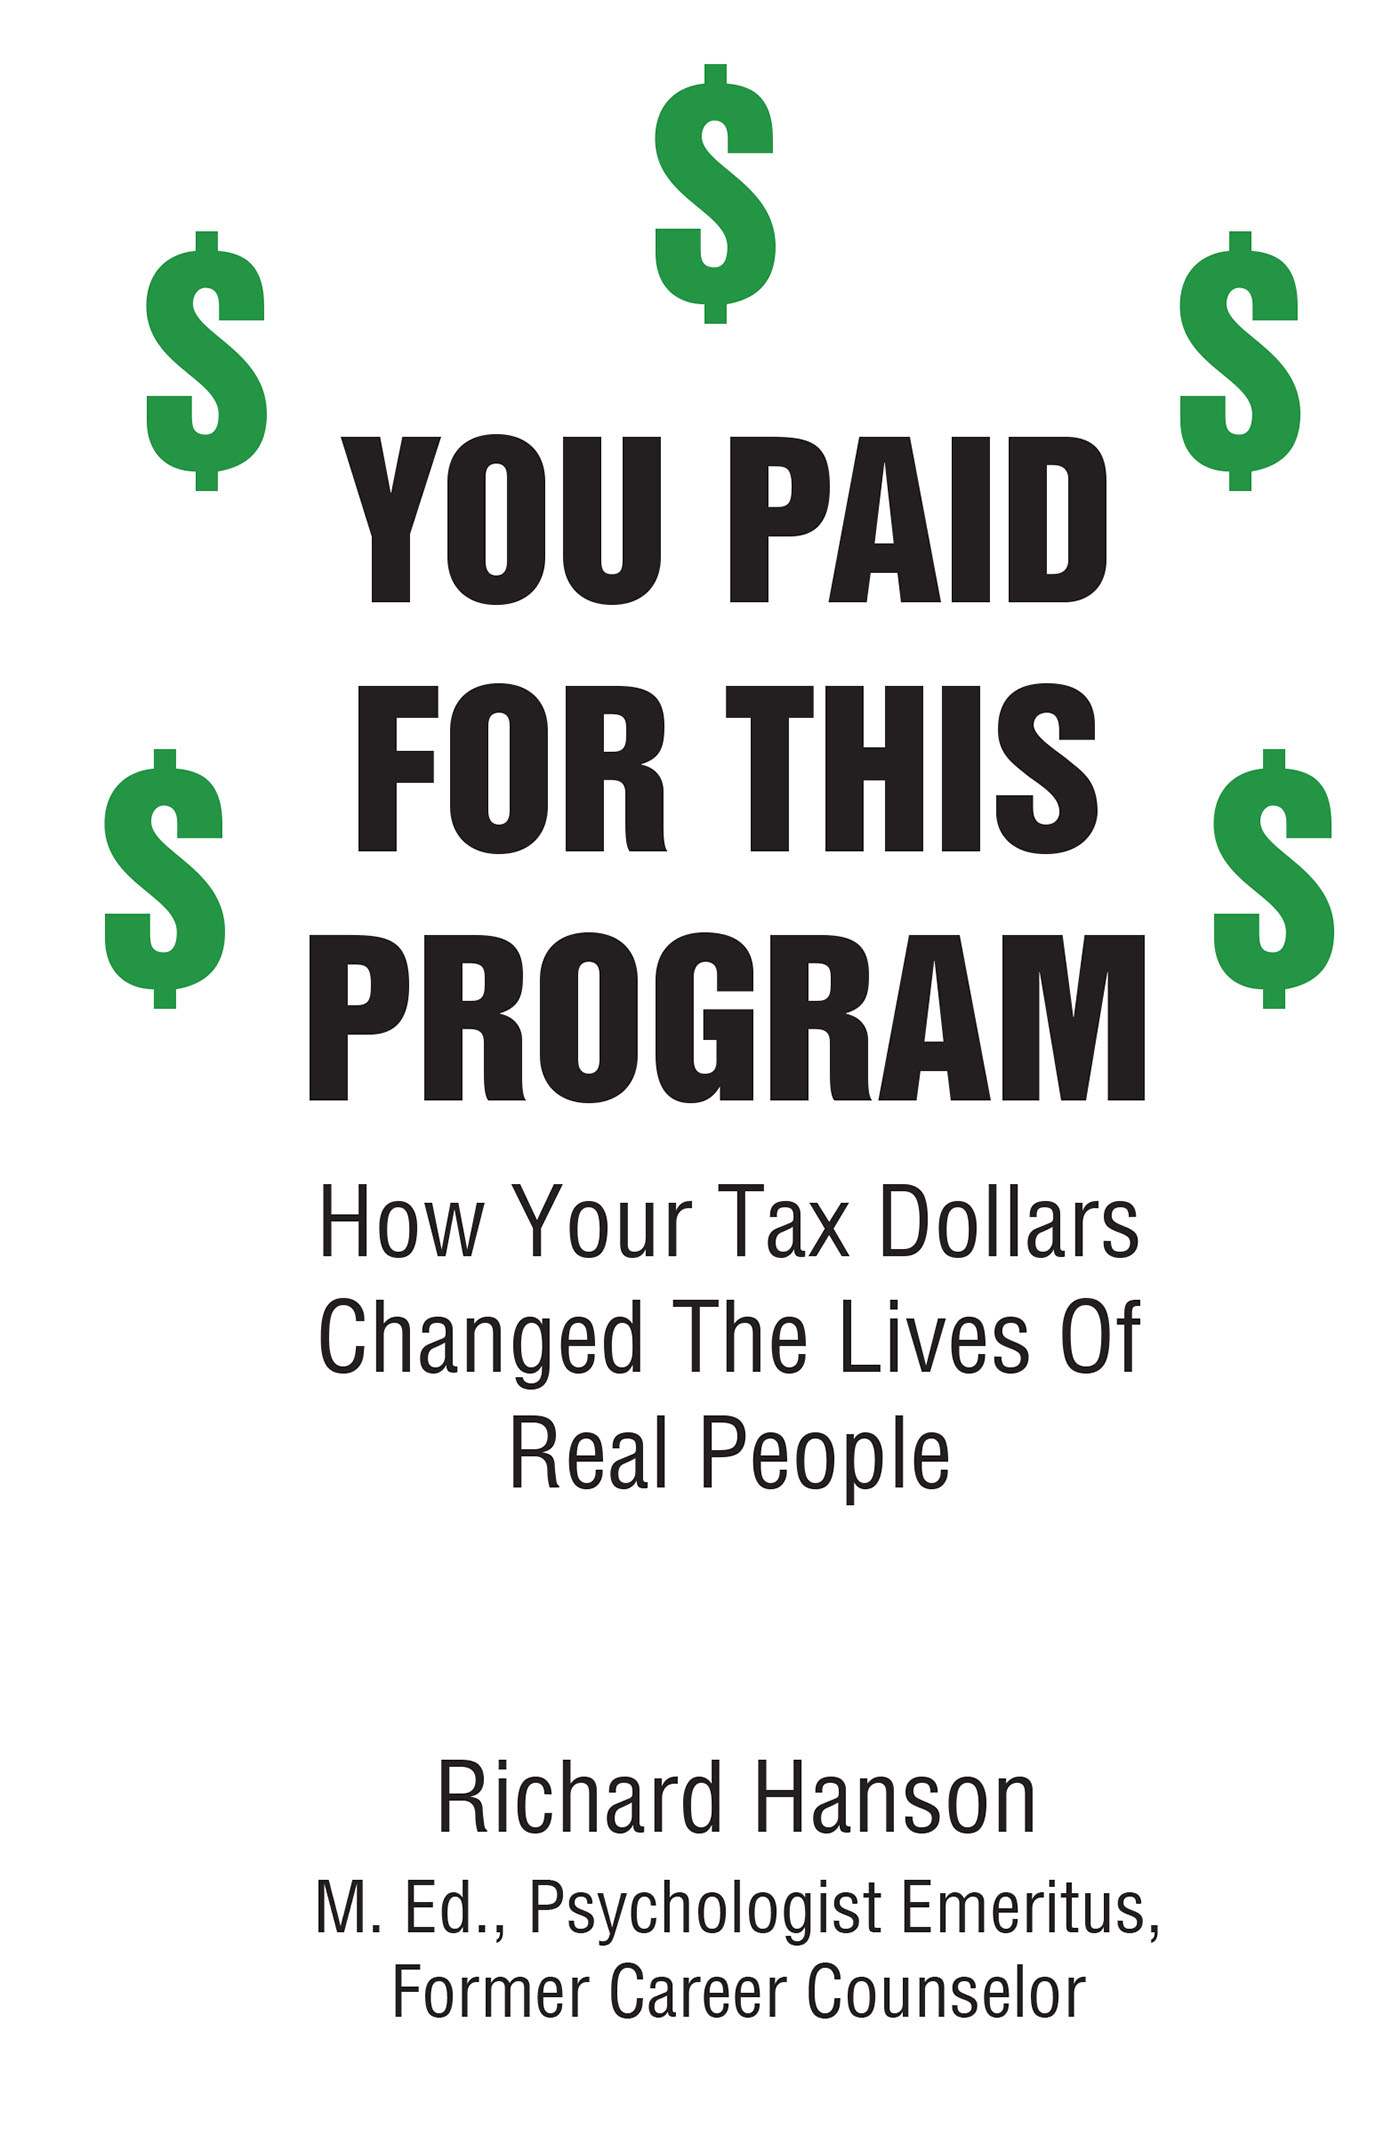 Author Richard Hanson’s New Book, “You Paid for this Program,” Explores Where Taxpayer Money is Allocated, Enlightening Readers to Some Important Tax-Funded Programs